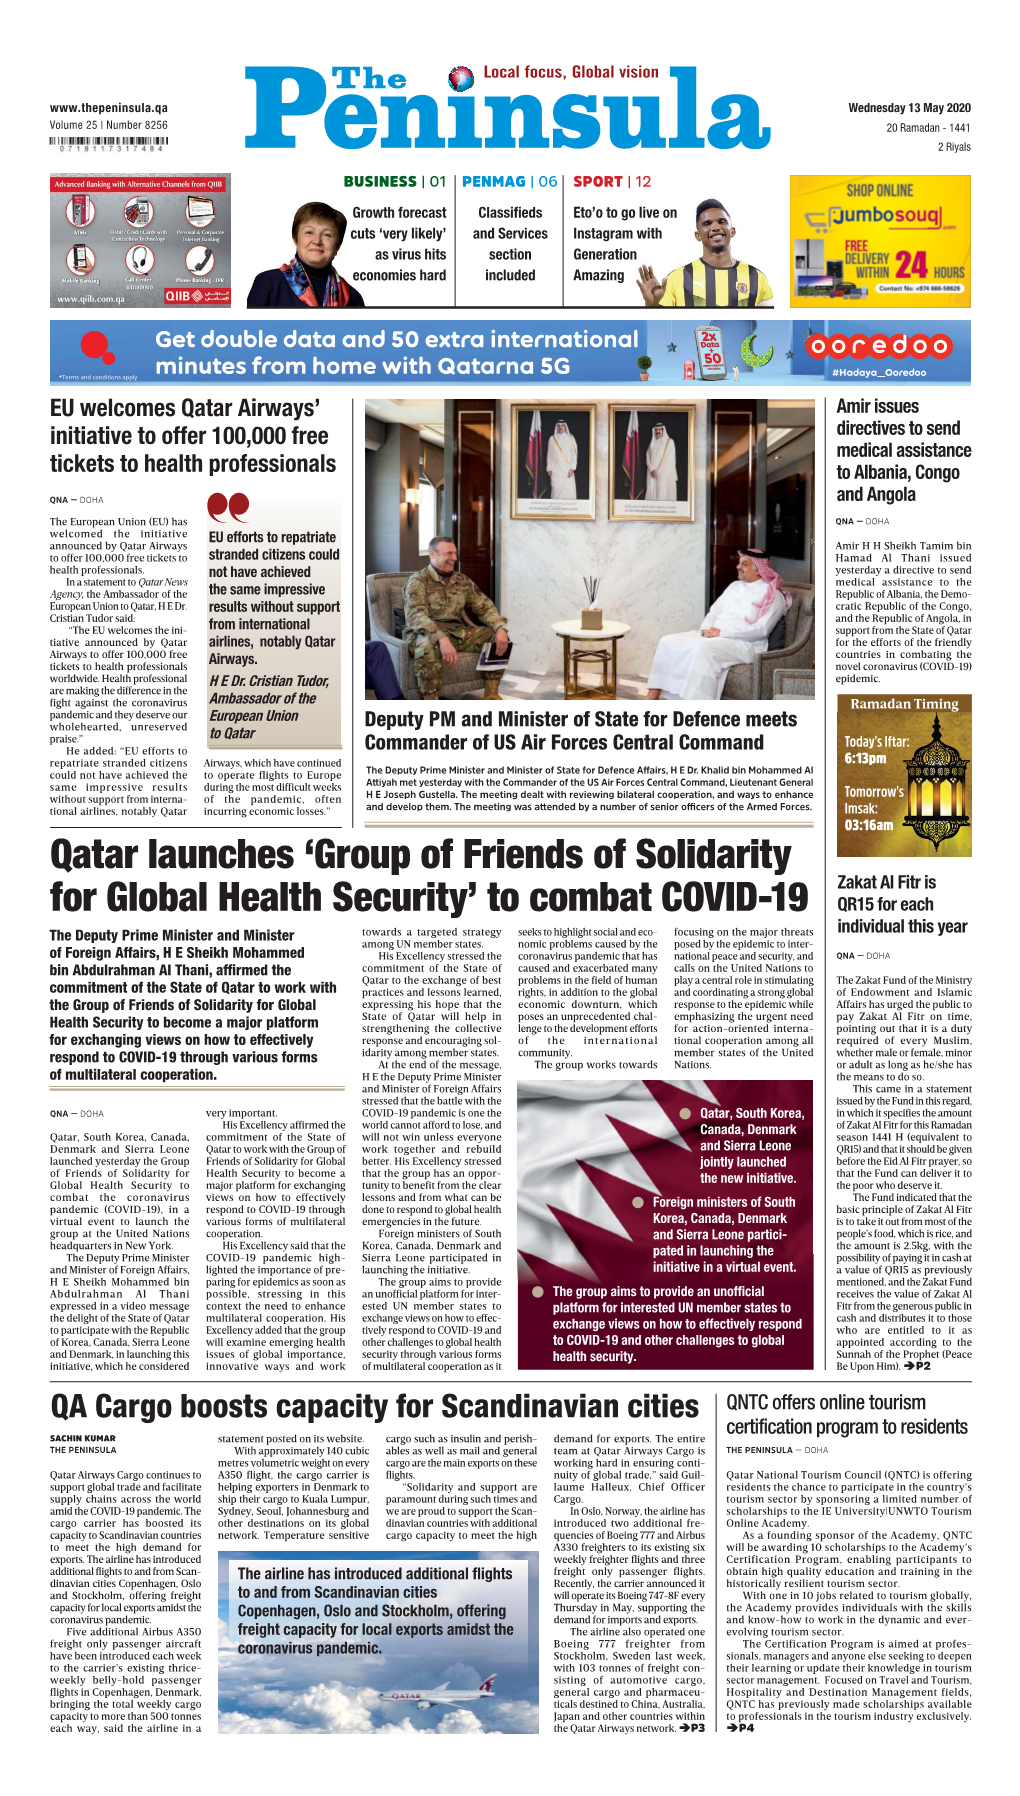 Qatar Launches 'Group of Friends of Solidarity for Global Health Security'